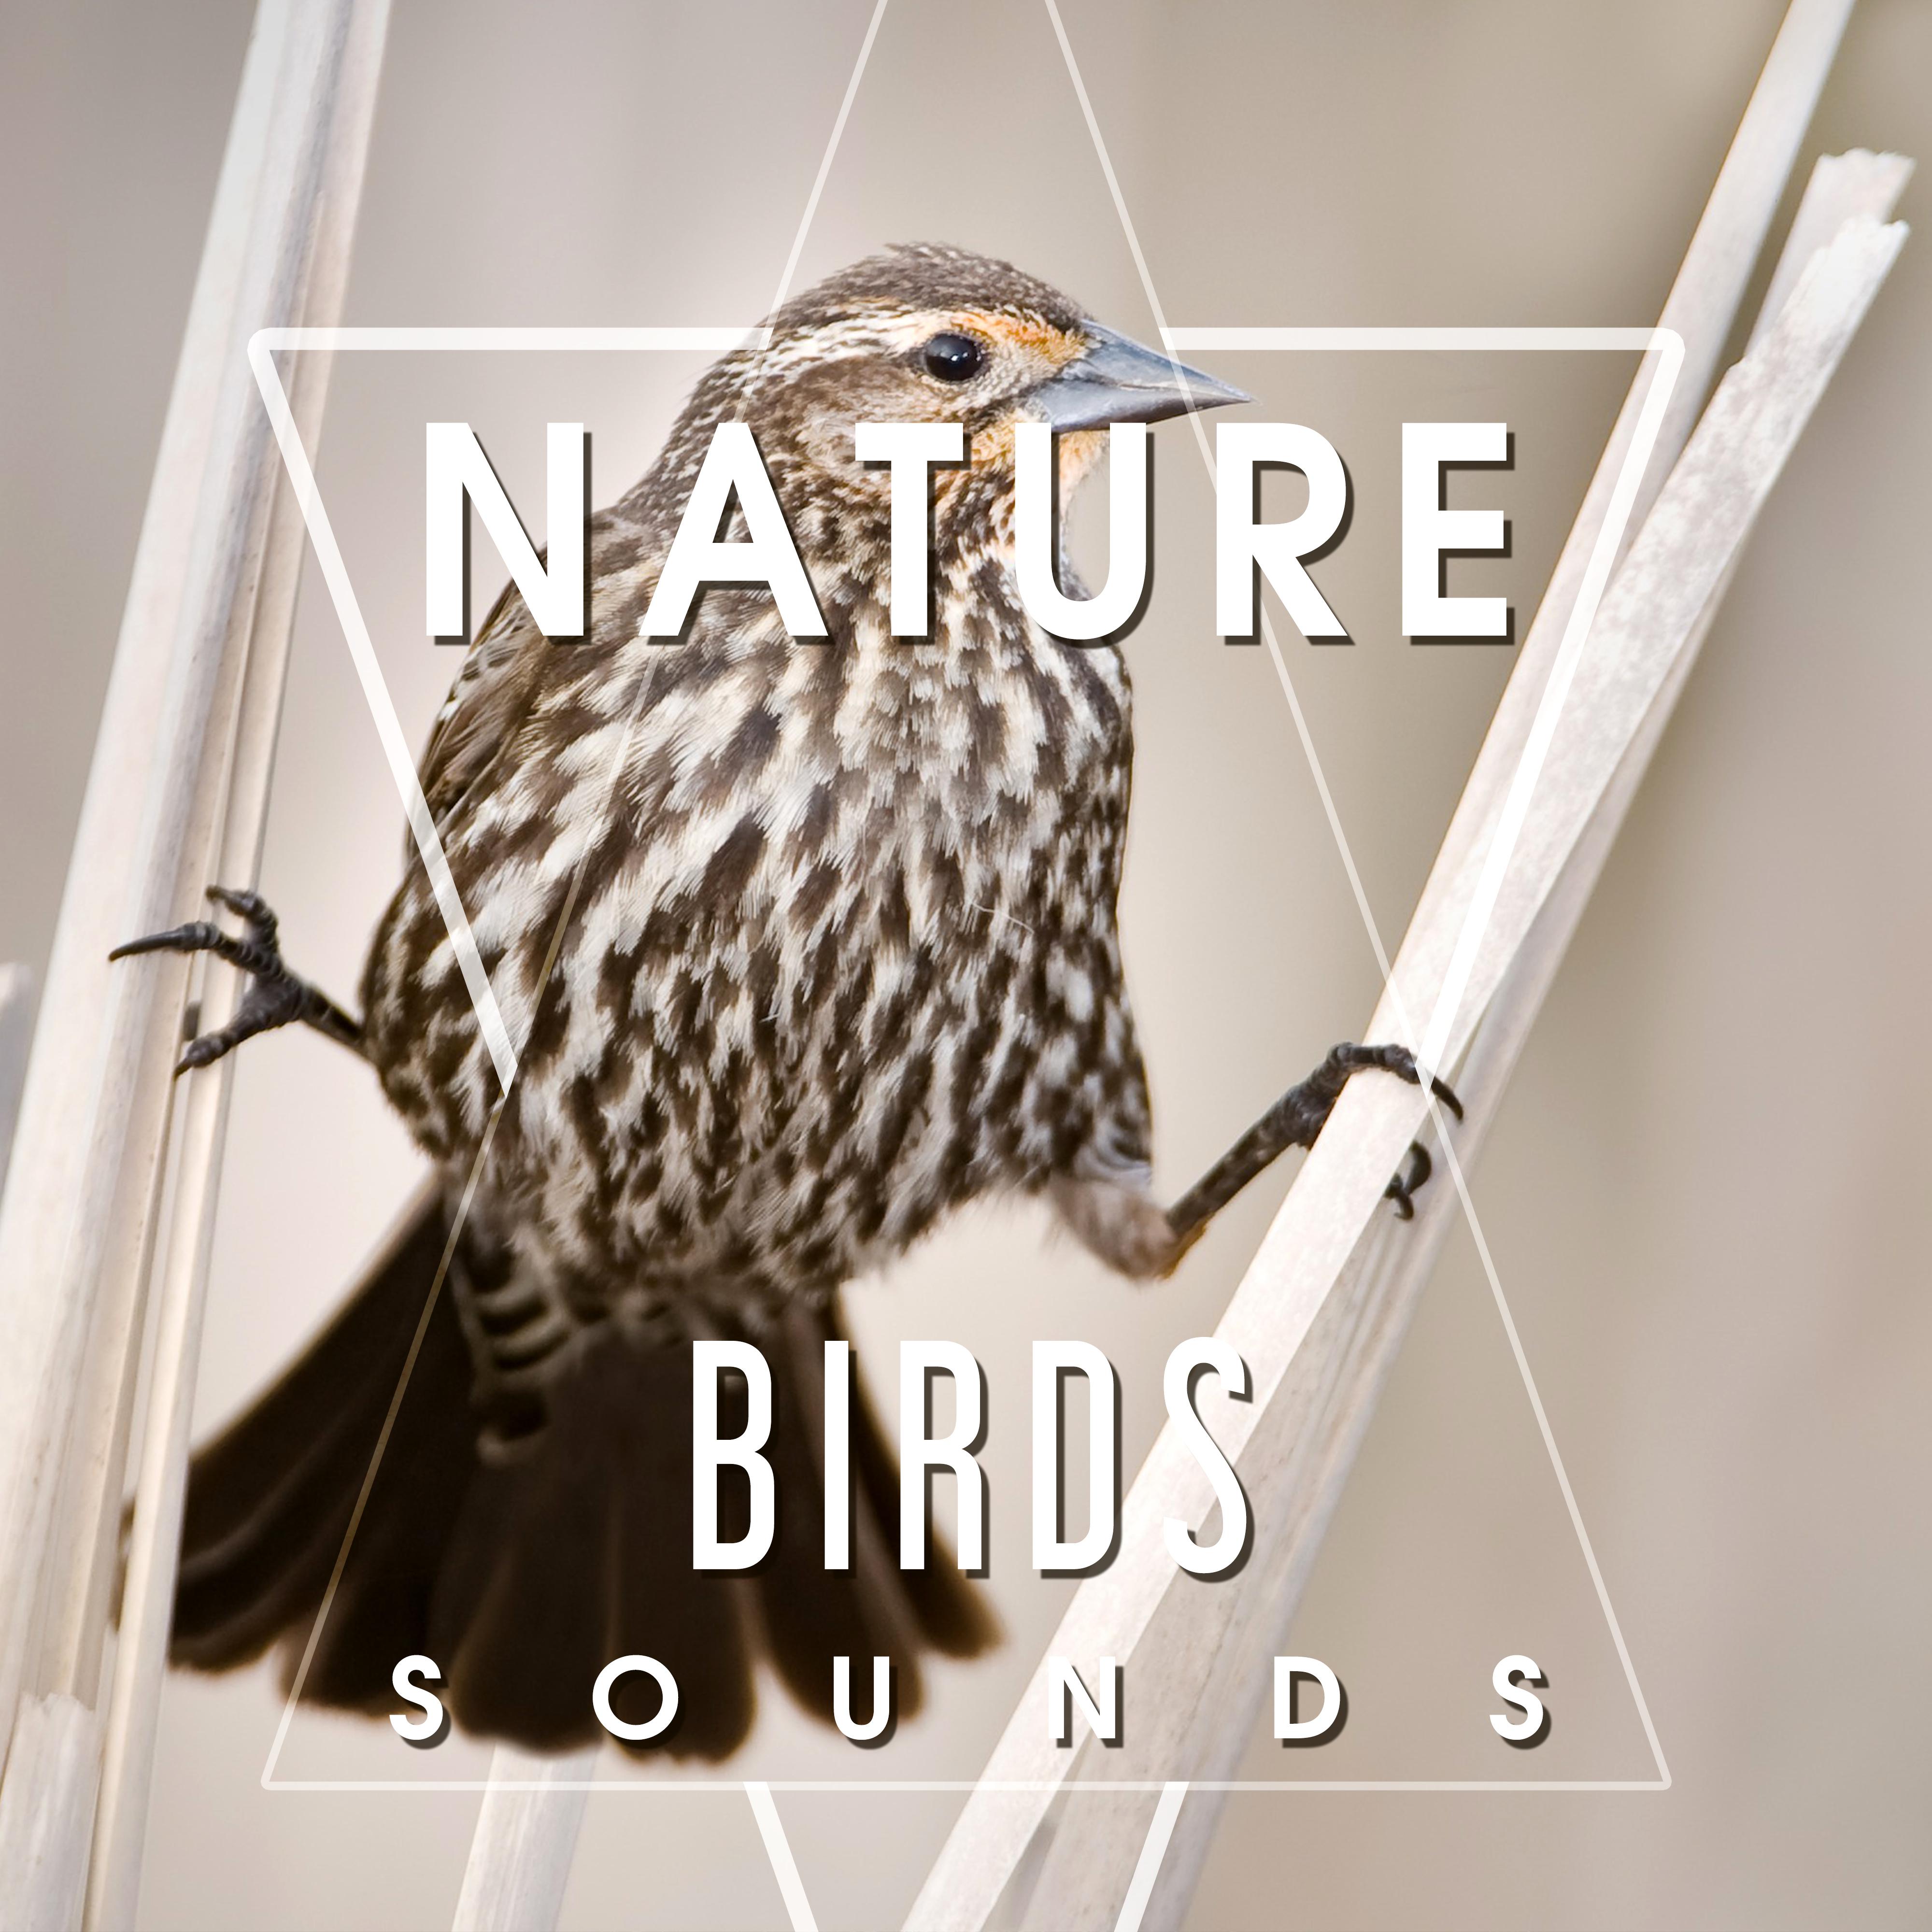 Nature Birds Sounds – Calming Sounds, Singing Birds, Sounds of Forest, Rest a Bit, Free Time